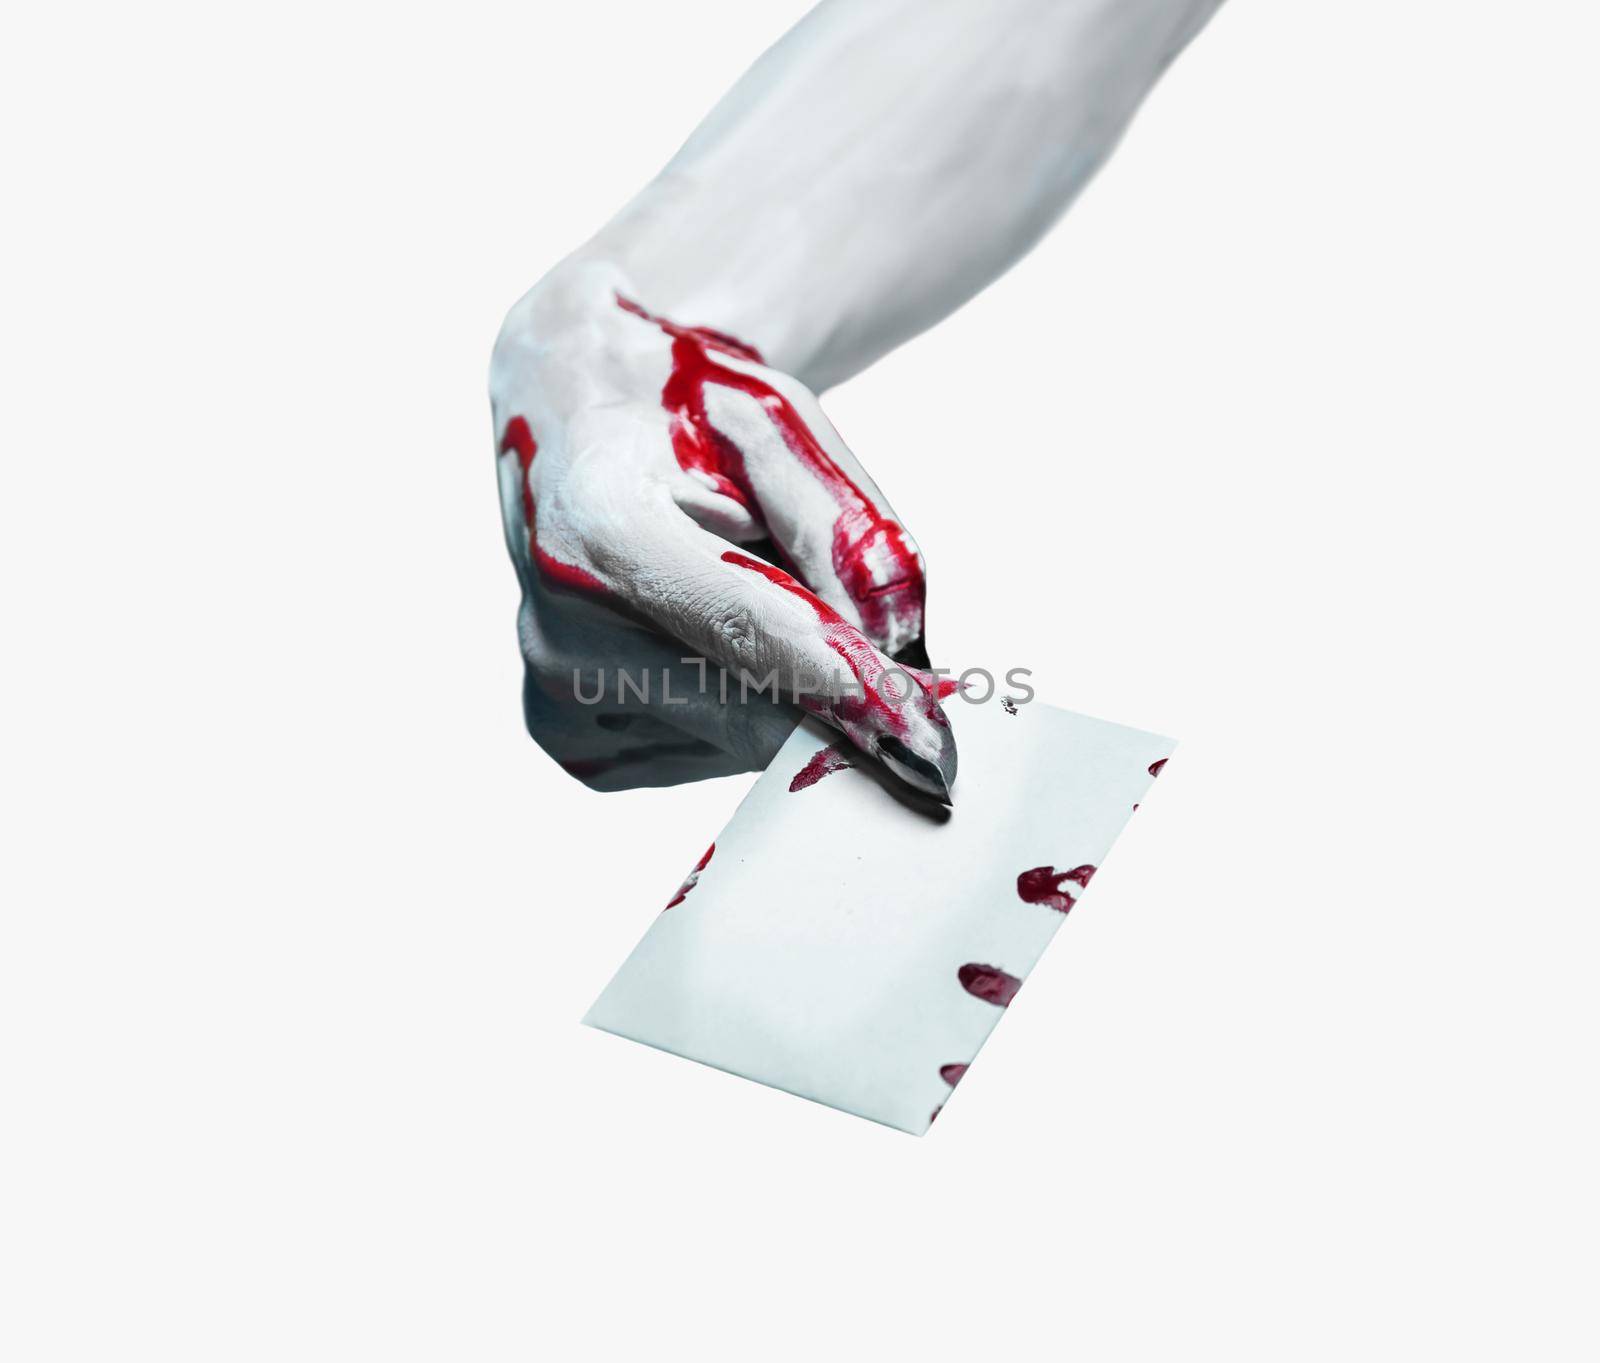 Vampire bloody hand gives empty card on white background, space for text. Halloween/horror theme